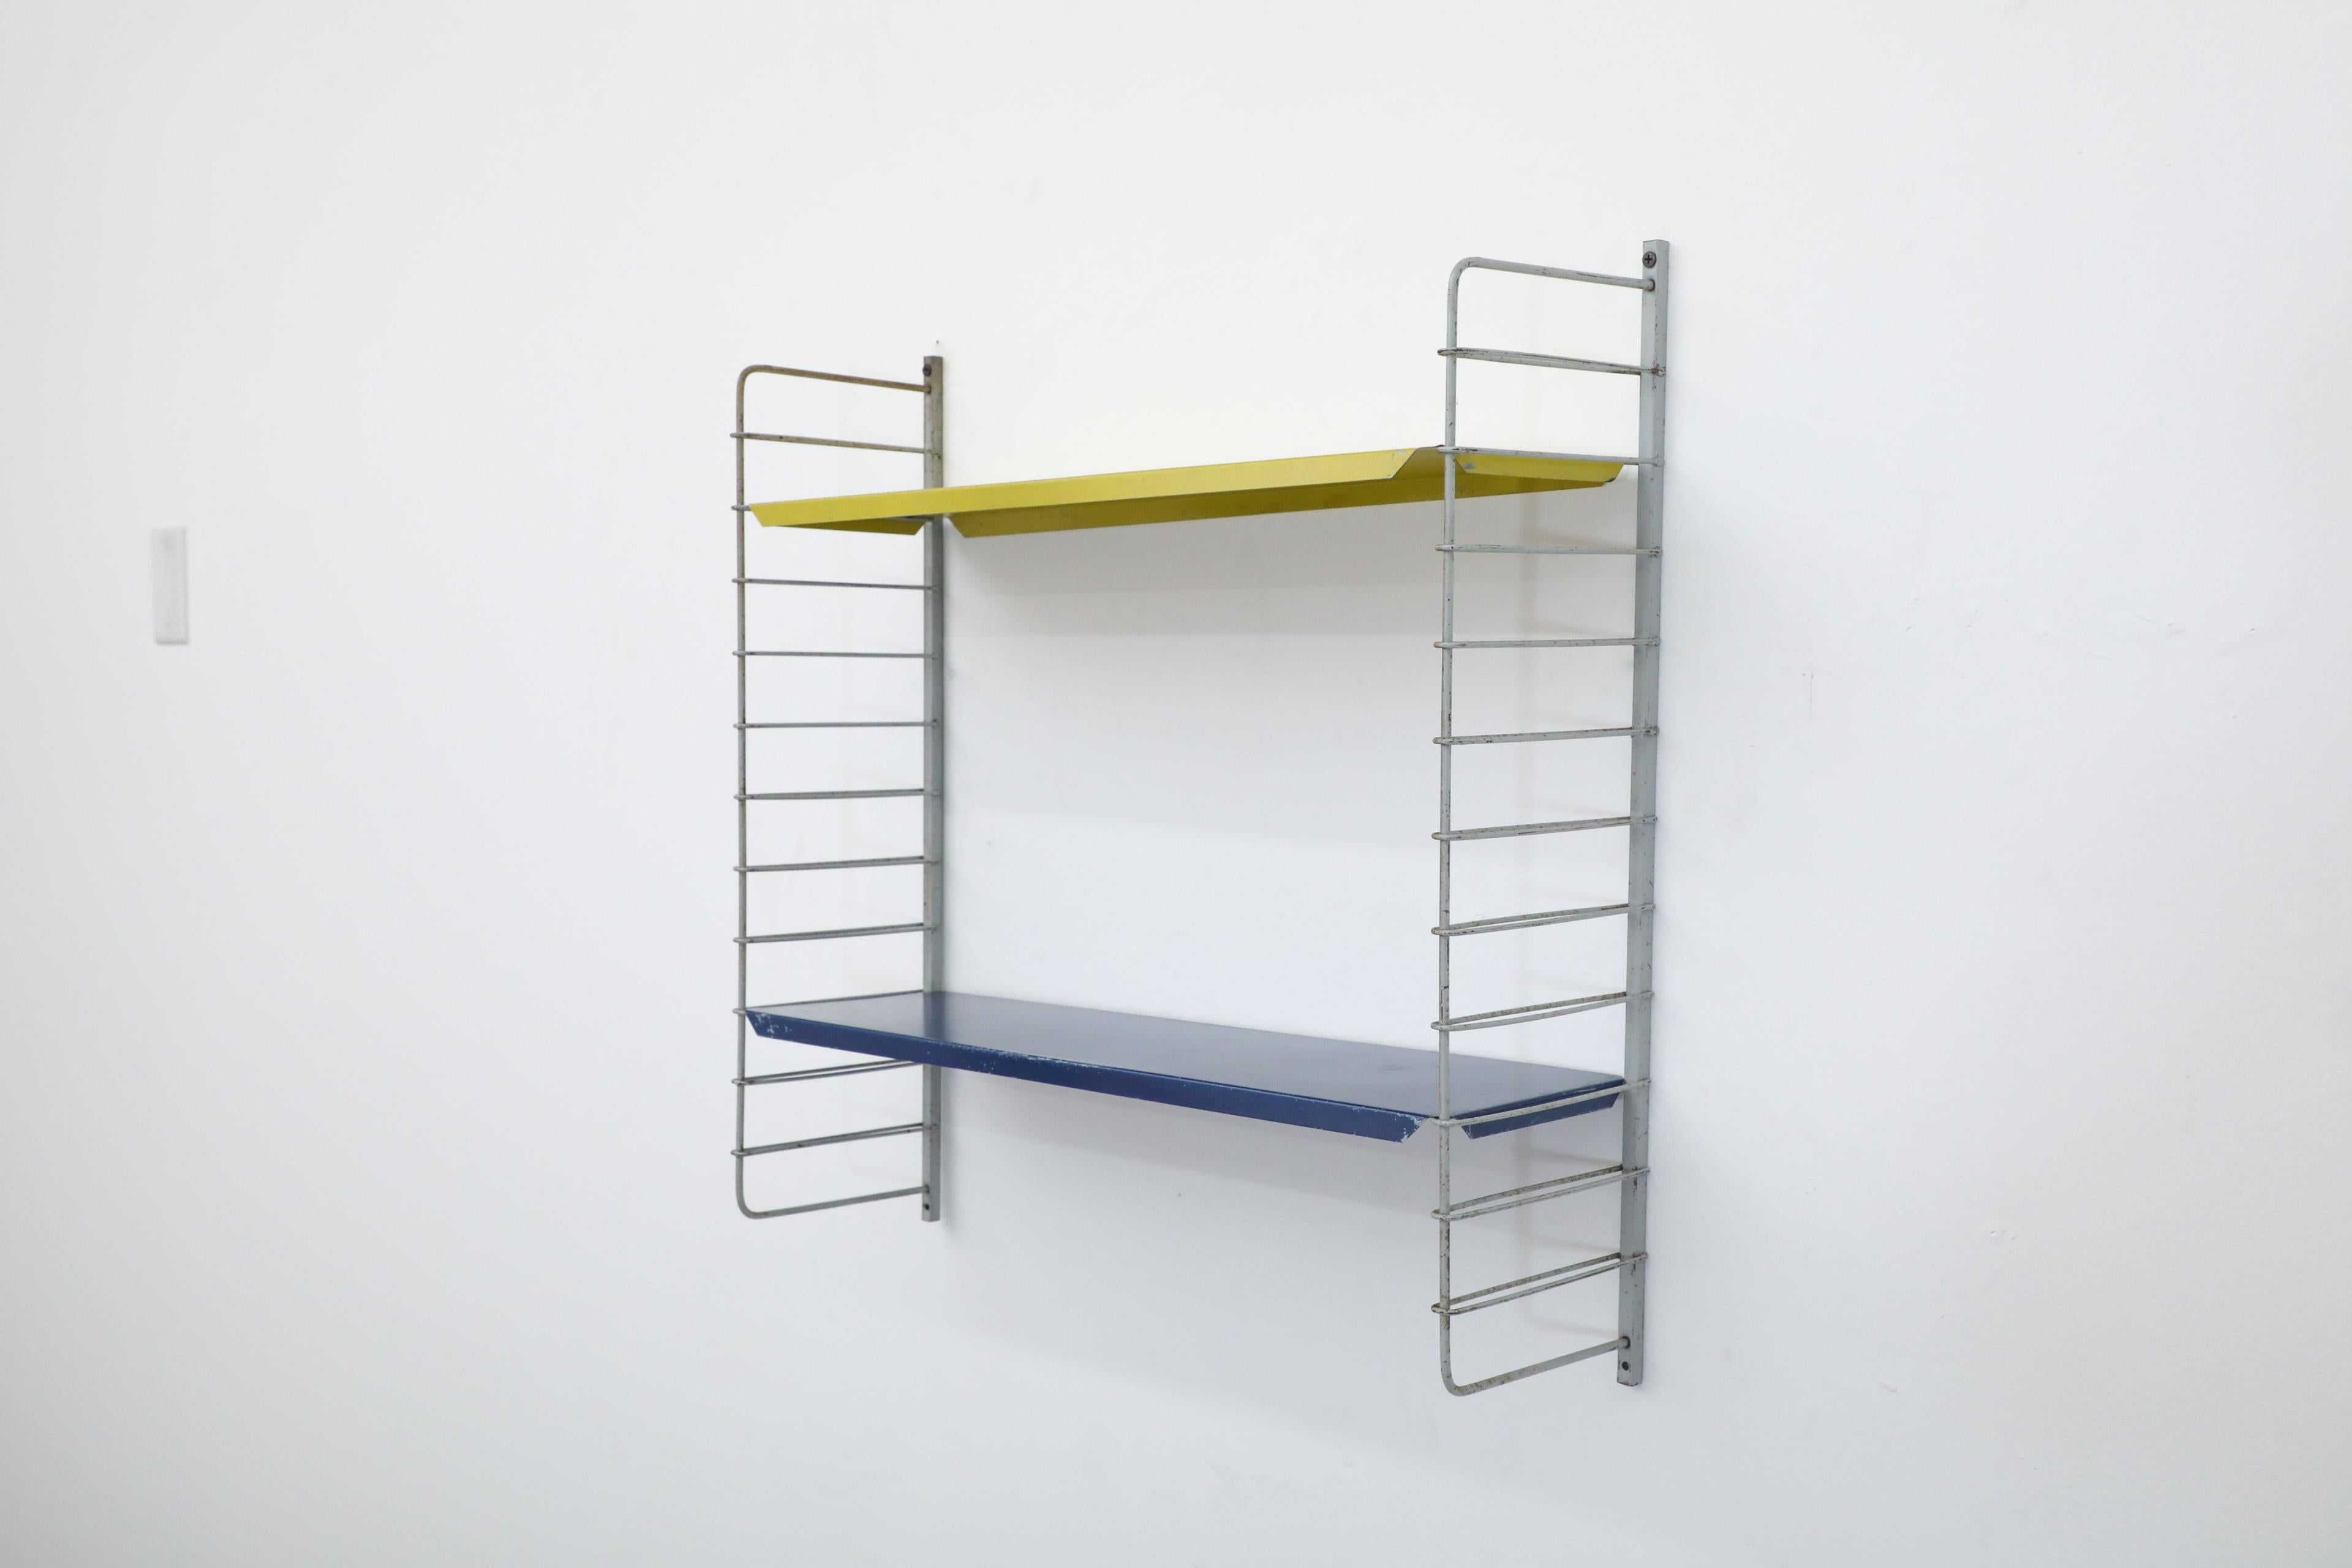 Enameled Tomado Style Single Section Shelving Unit with Yellow and Blue Shelves For Sale